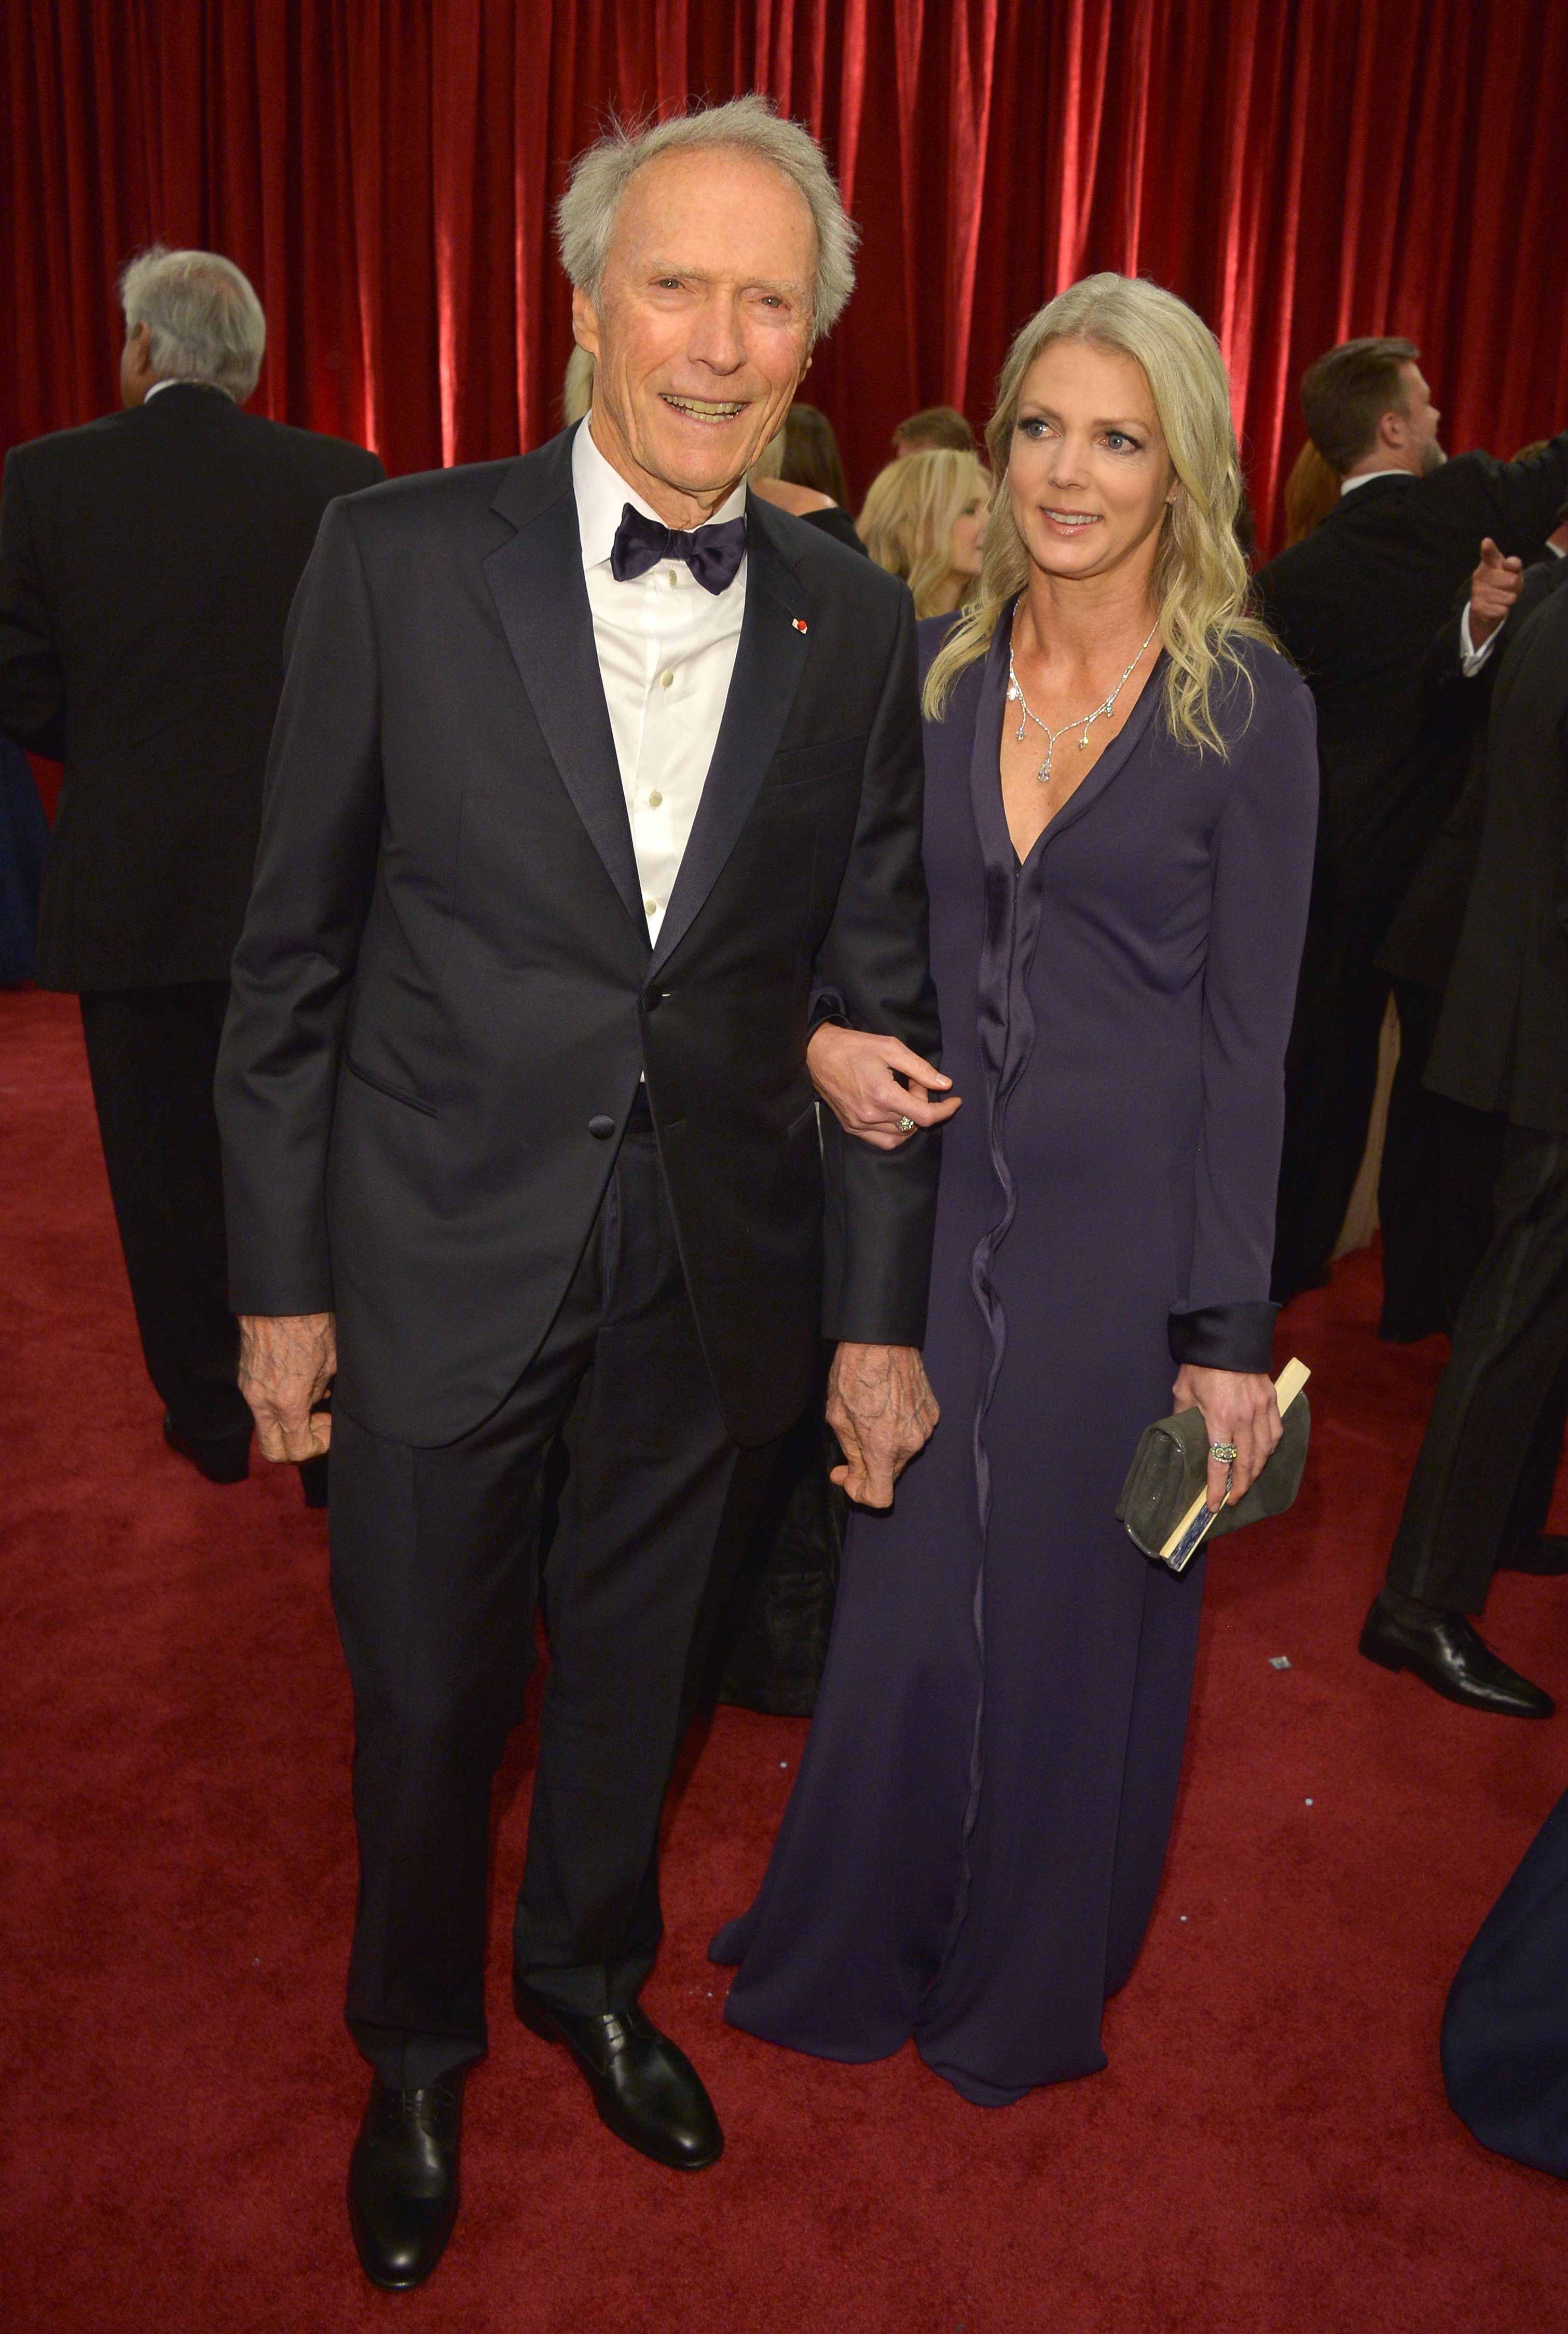 Clint Eastwood and Christina Sandera at the 87th Annual Academy Awards in Los Angeles, California on February 22, 2015 | Source: Getty Images